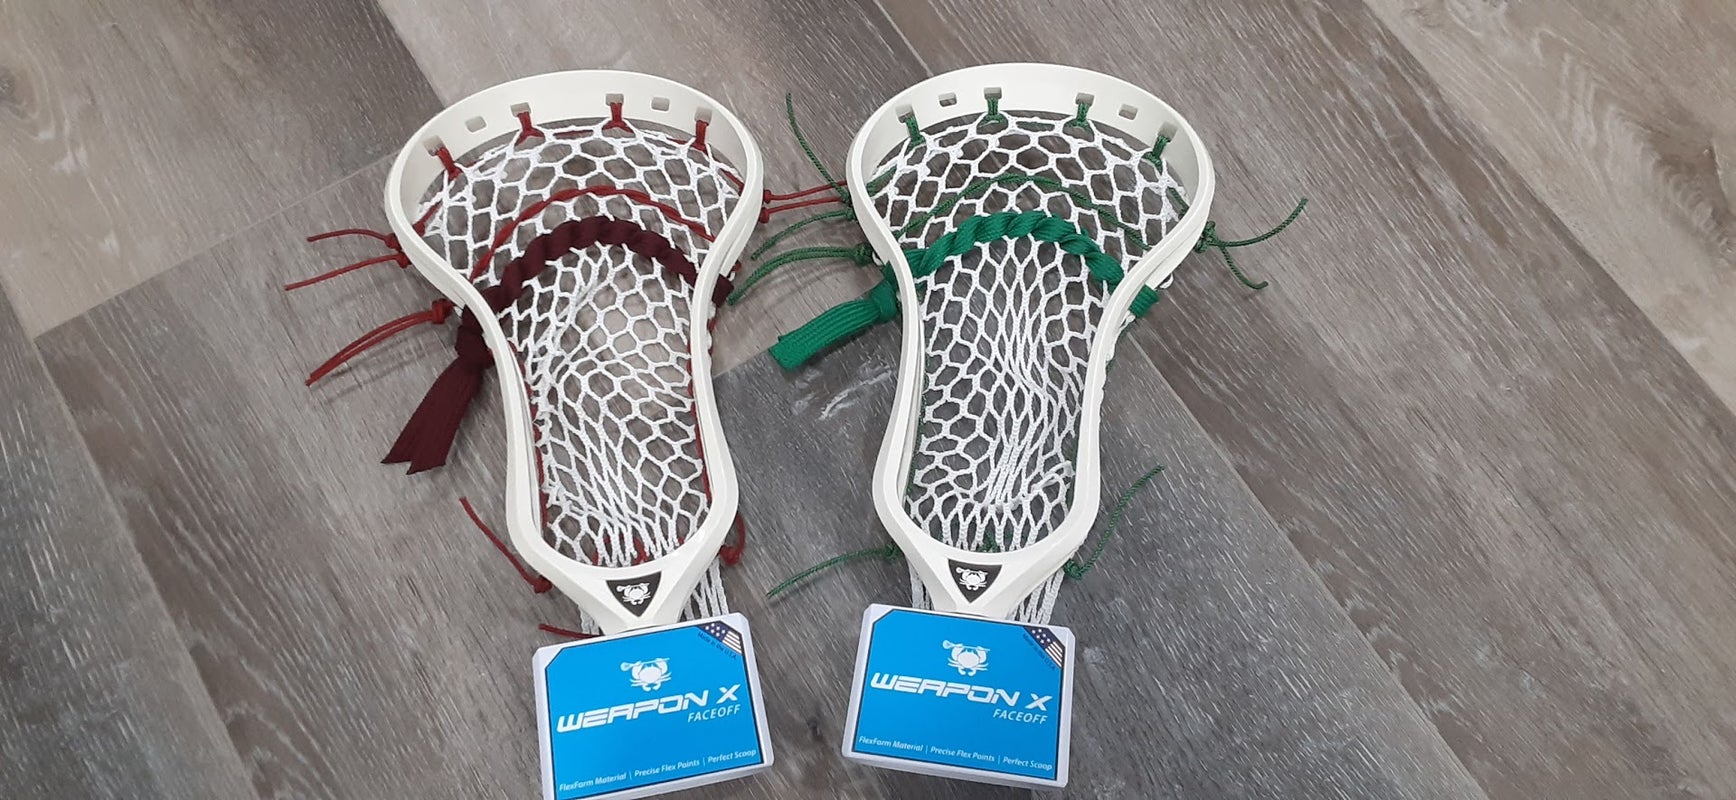 ANY COLOR STRINGING OUTSIDE FACE OFF Pocket New ECD Weapon X  #fjaylax PRICE IS FOR 1 HEAD